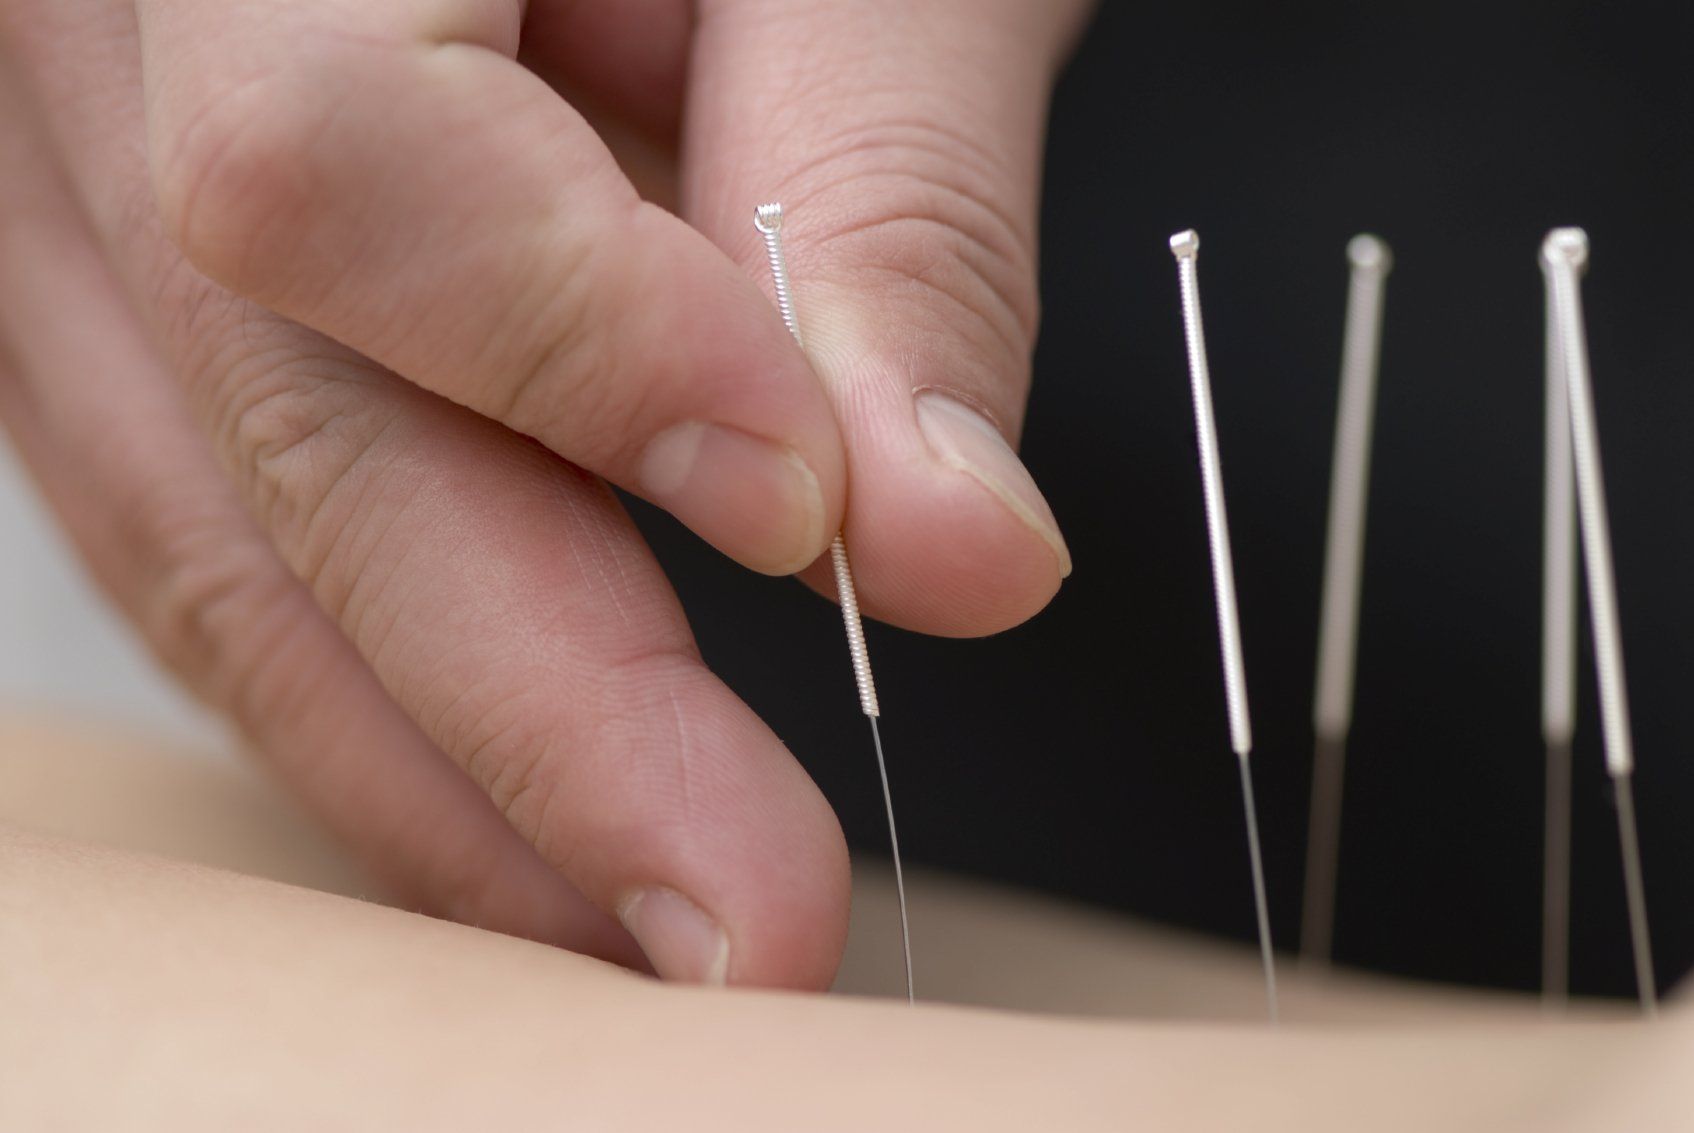 Home page image on Lauren Emsley Acupuncture linking to information on how acupuncture can benefit certain conditions